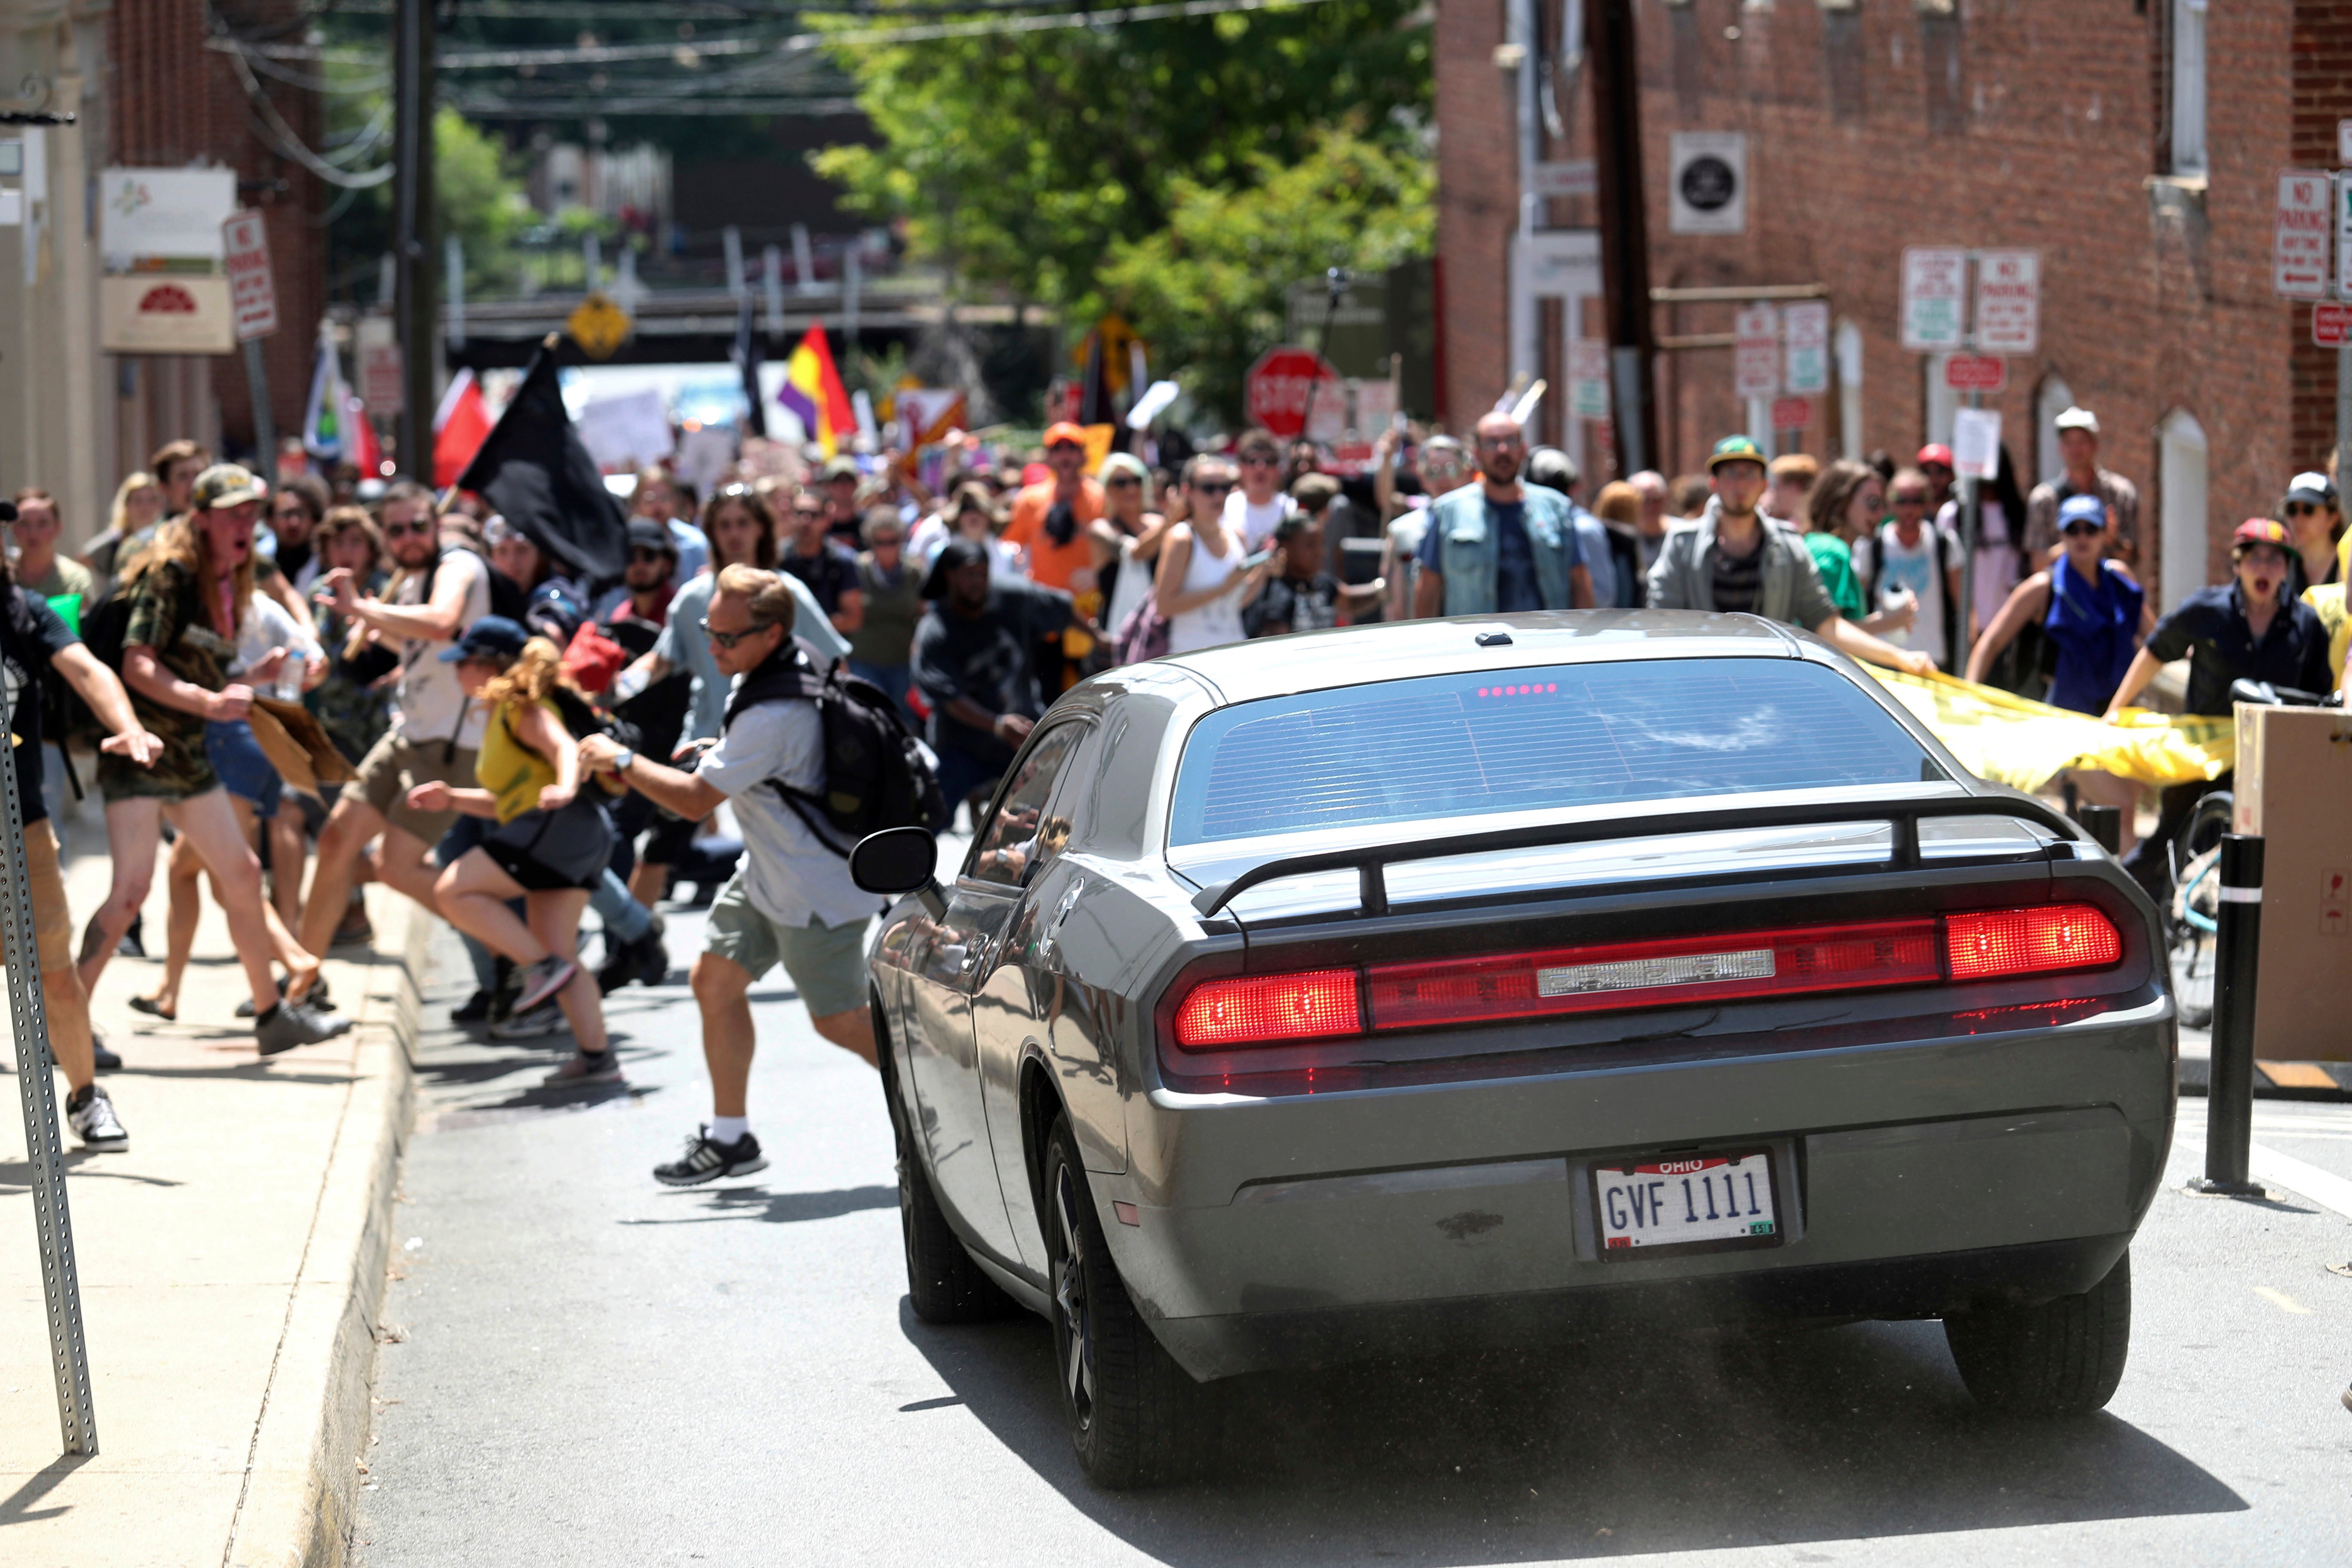 A vehicle drives into a group of protesters demonstrating against a white nationalist rally in Charlottesville, Va. on Aug. 12, 2017, resulting in dozens of injuries and the death of 32-year-old Heather Heyer. (Photo: Ryan M. Kelly, AP)